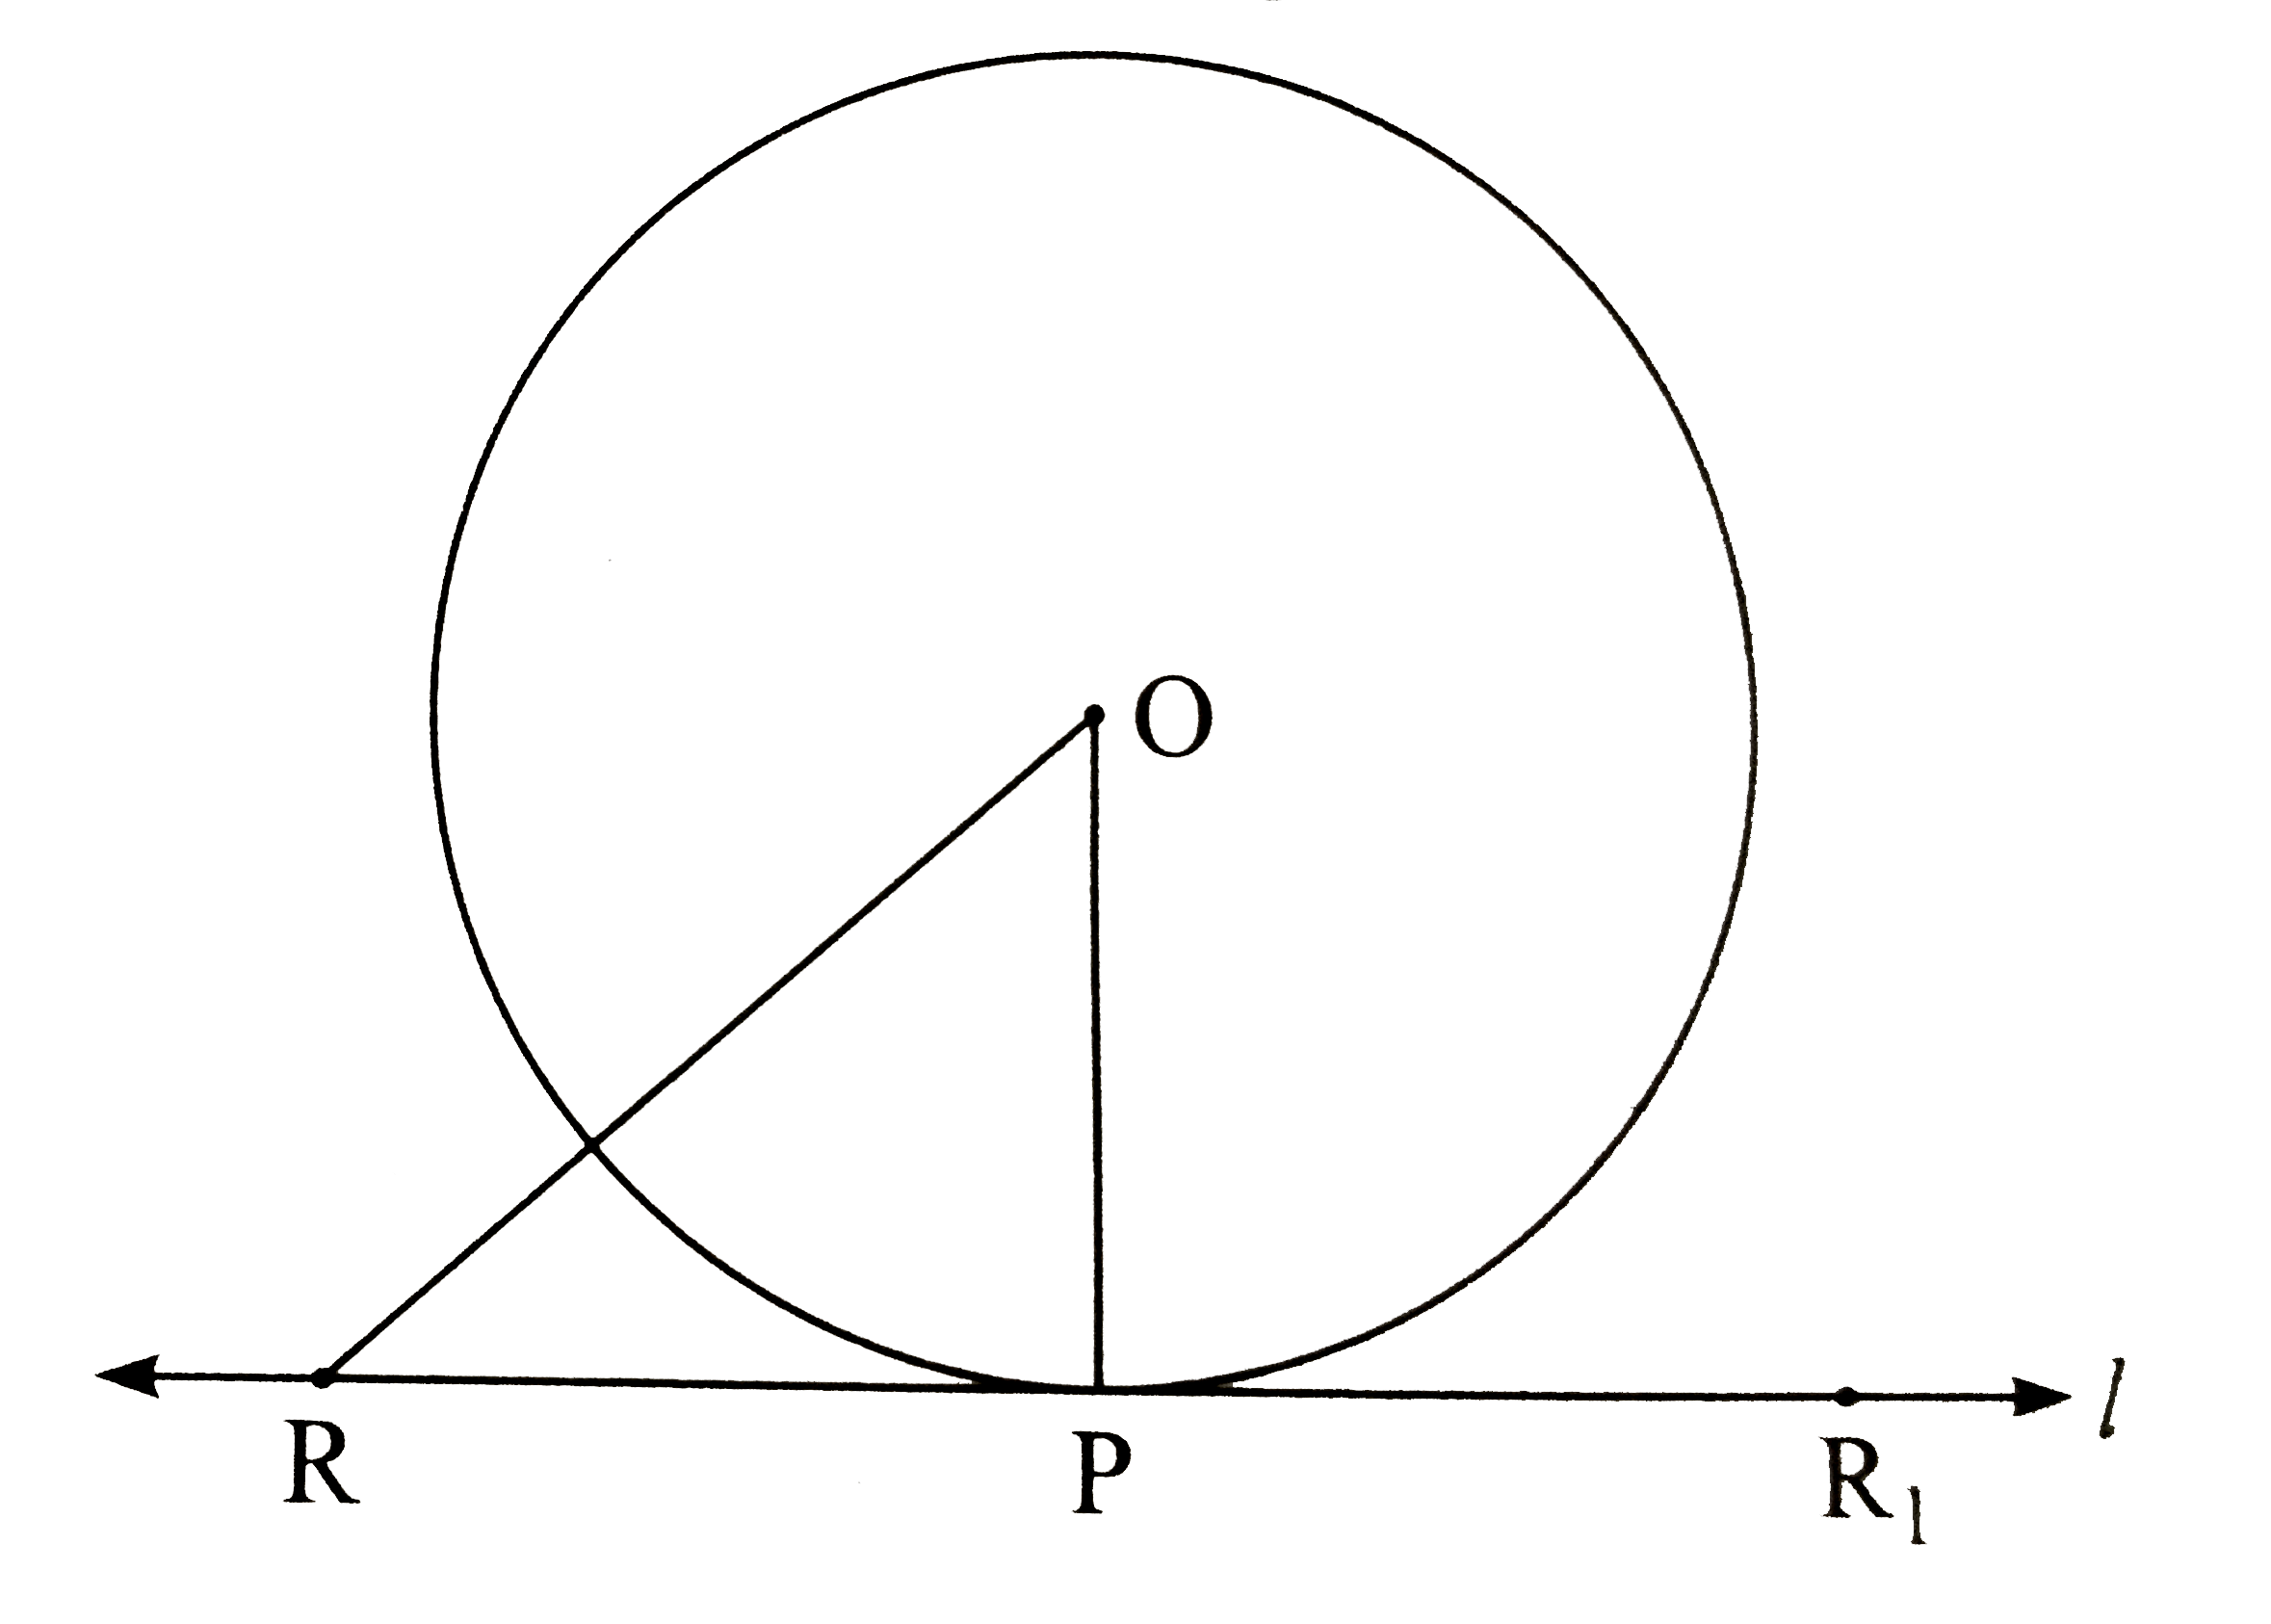 Line l touches a circle with centre O at point P. If radius of  the circle is 9 cm, answer the following :   (1) What is  d(O,P) = ? Why ?   (2) If d(O,Q) = 8 cm , where does  the point Q lie ?         (3)   If d( O,R )  = 15 cm , how many locations of point R are line on line l ? At what distance will each  of them be from point P?